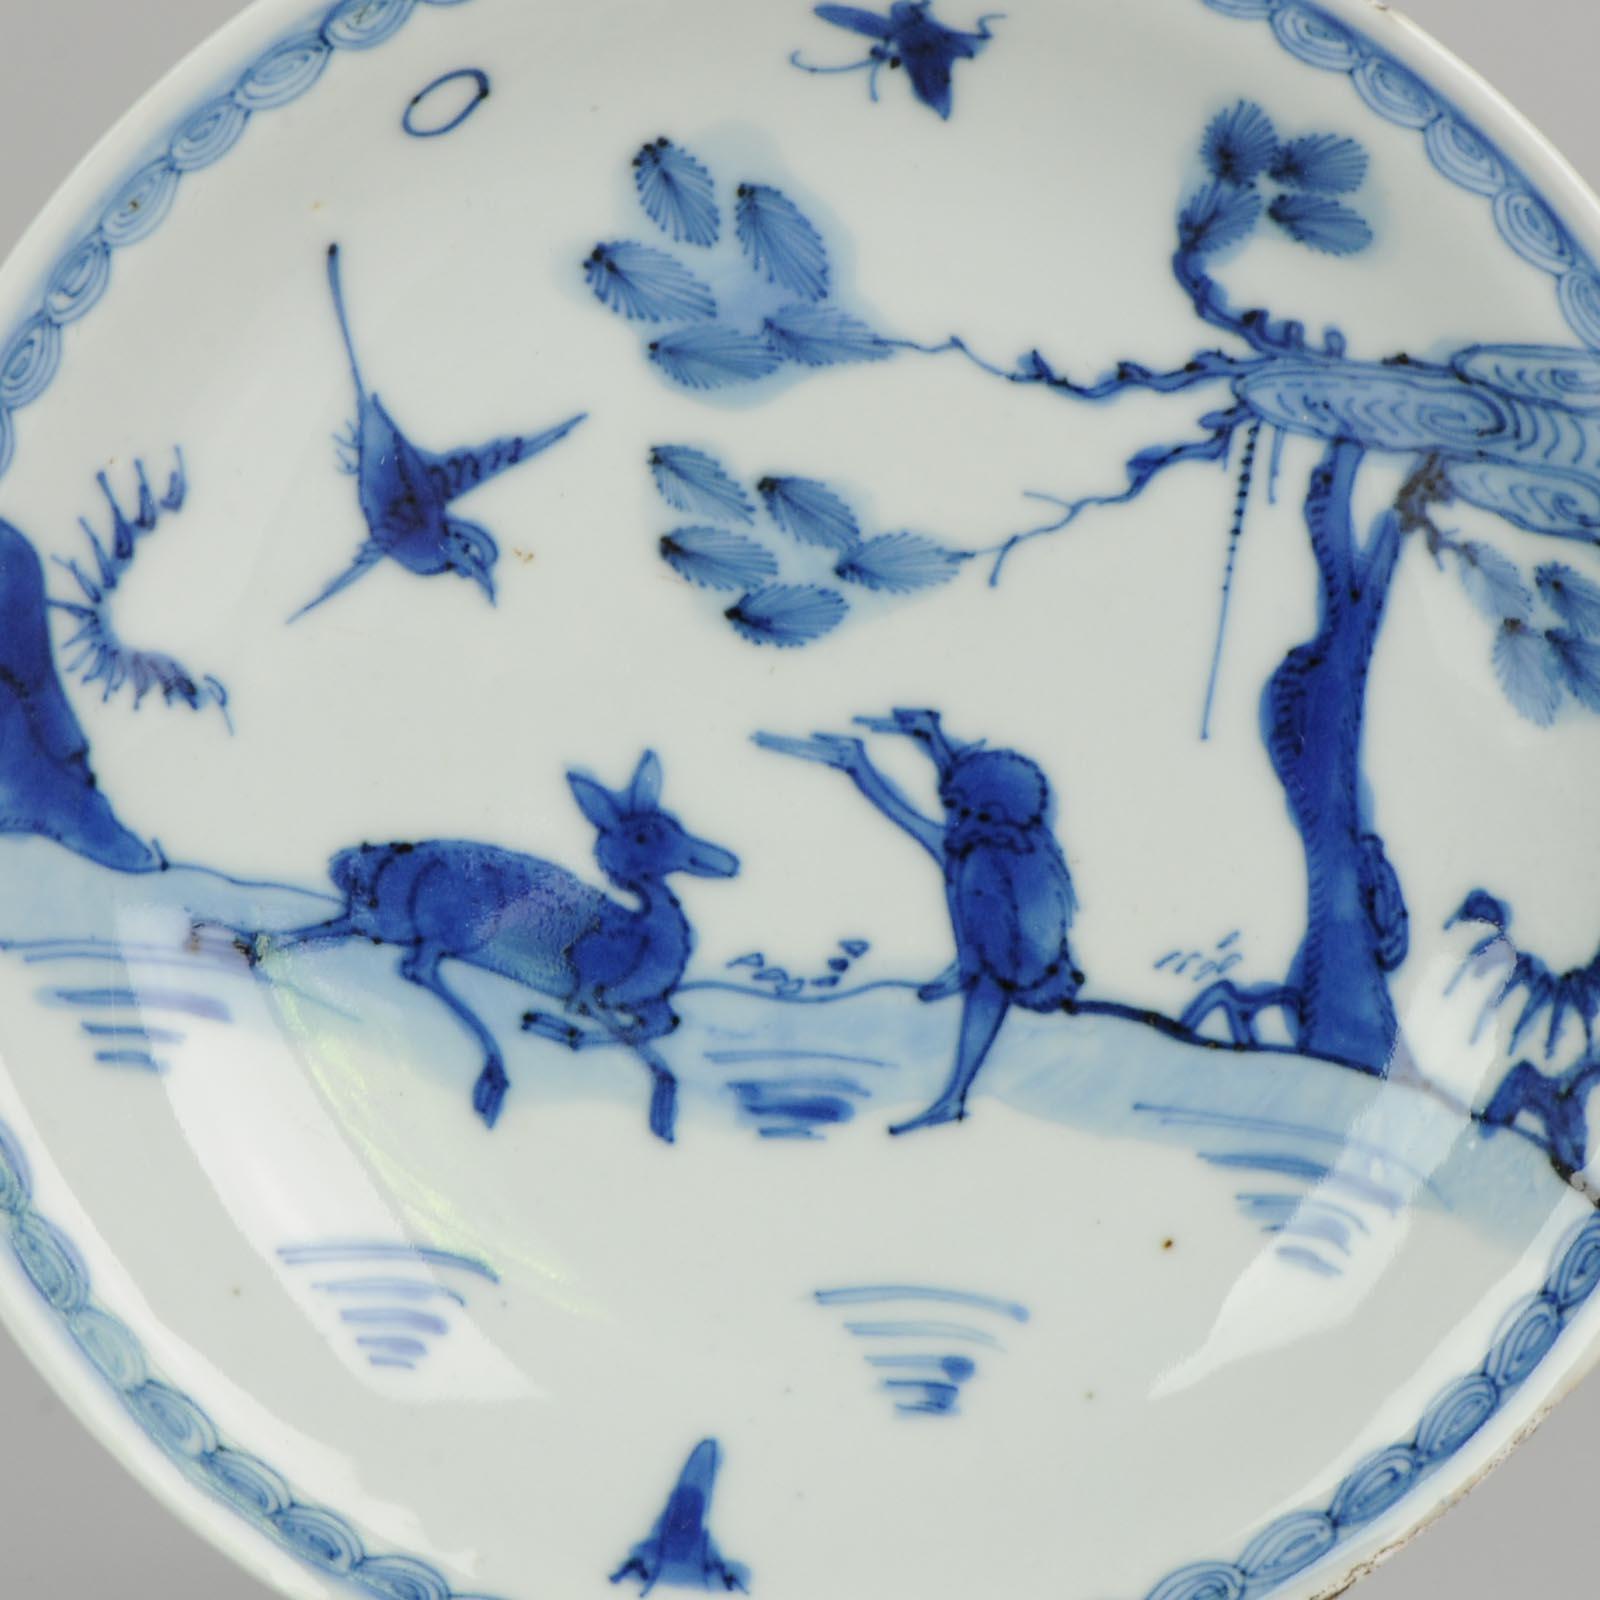 A very nicely decorated plate. A late Ming Ksometsuke porcelain dish, Tianqi or Chongzhen Period 1621–1644.
Painted with a deer, monkey, butterfly, bird and pine tree.

For similar examples of this listing see:

Sheaf, C. (1989). Christies